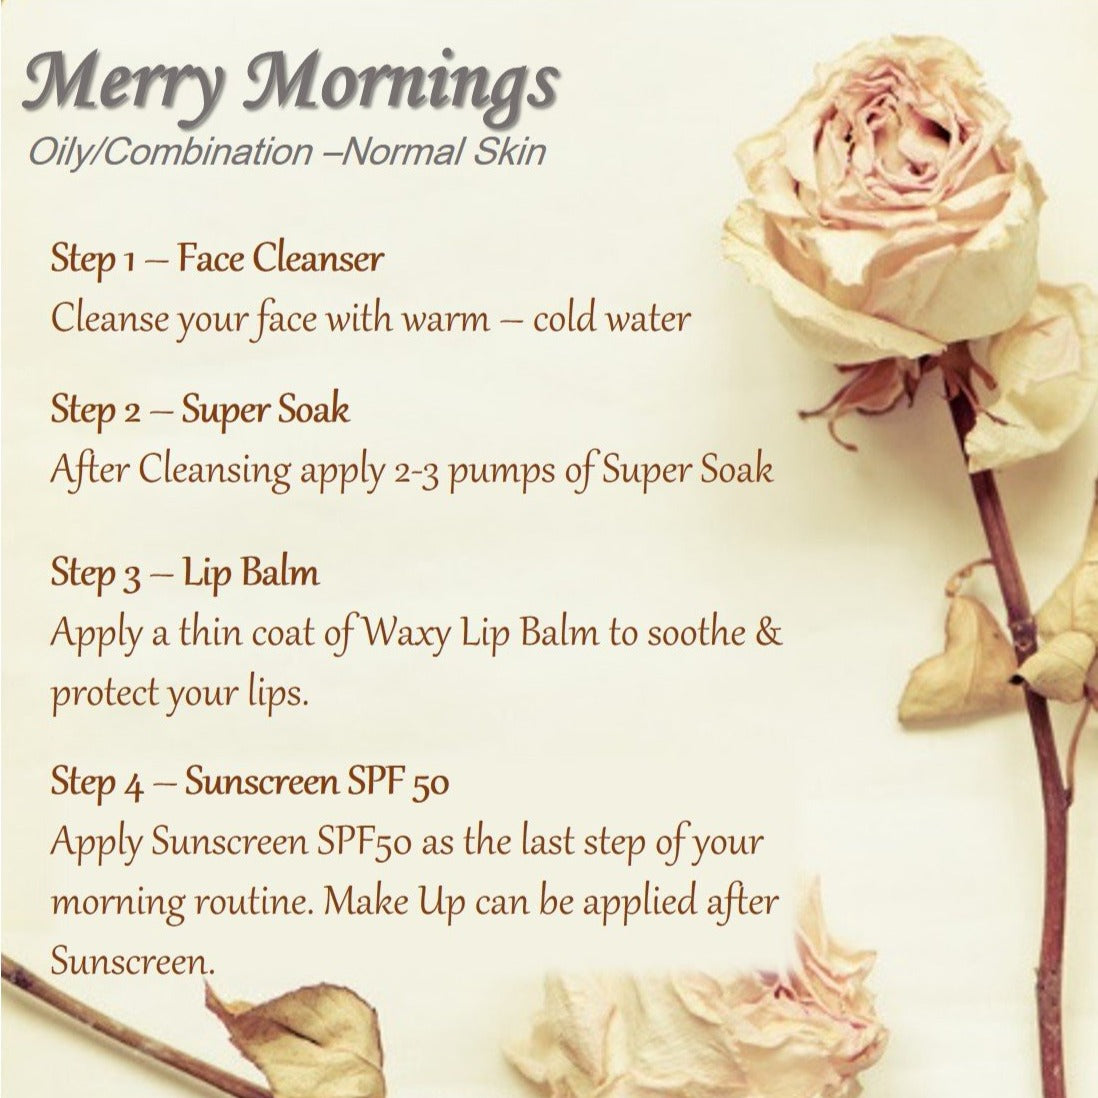 Merry Mornings - Oily/Combination to Normal Skin